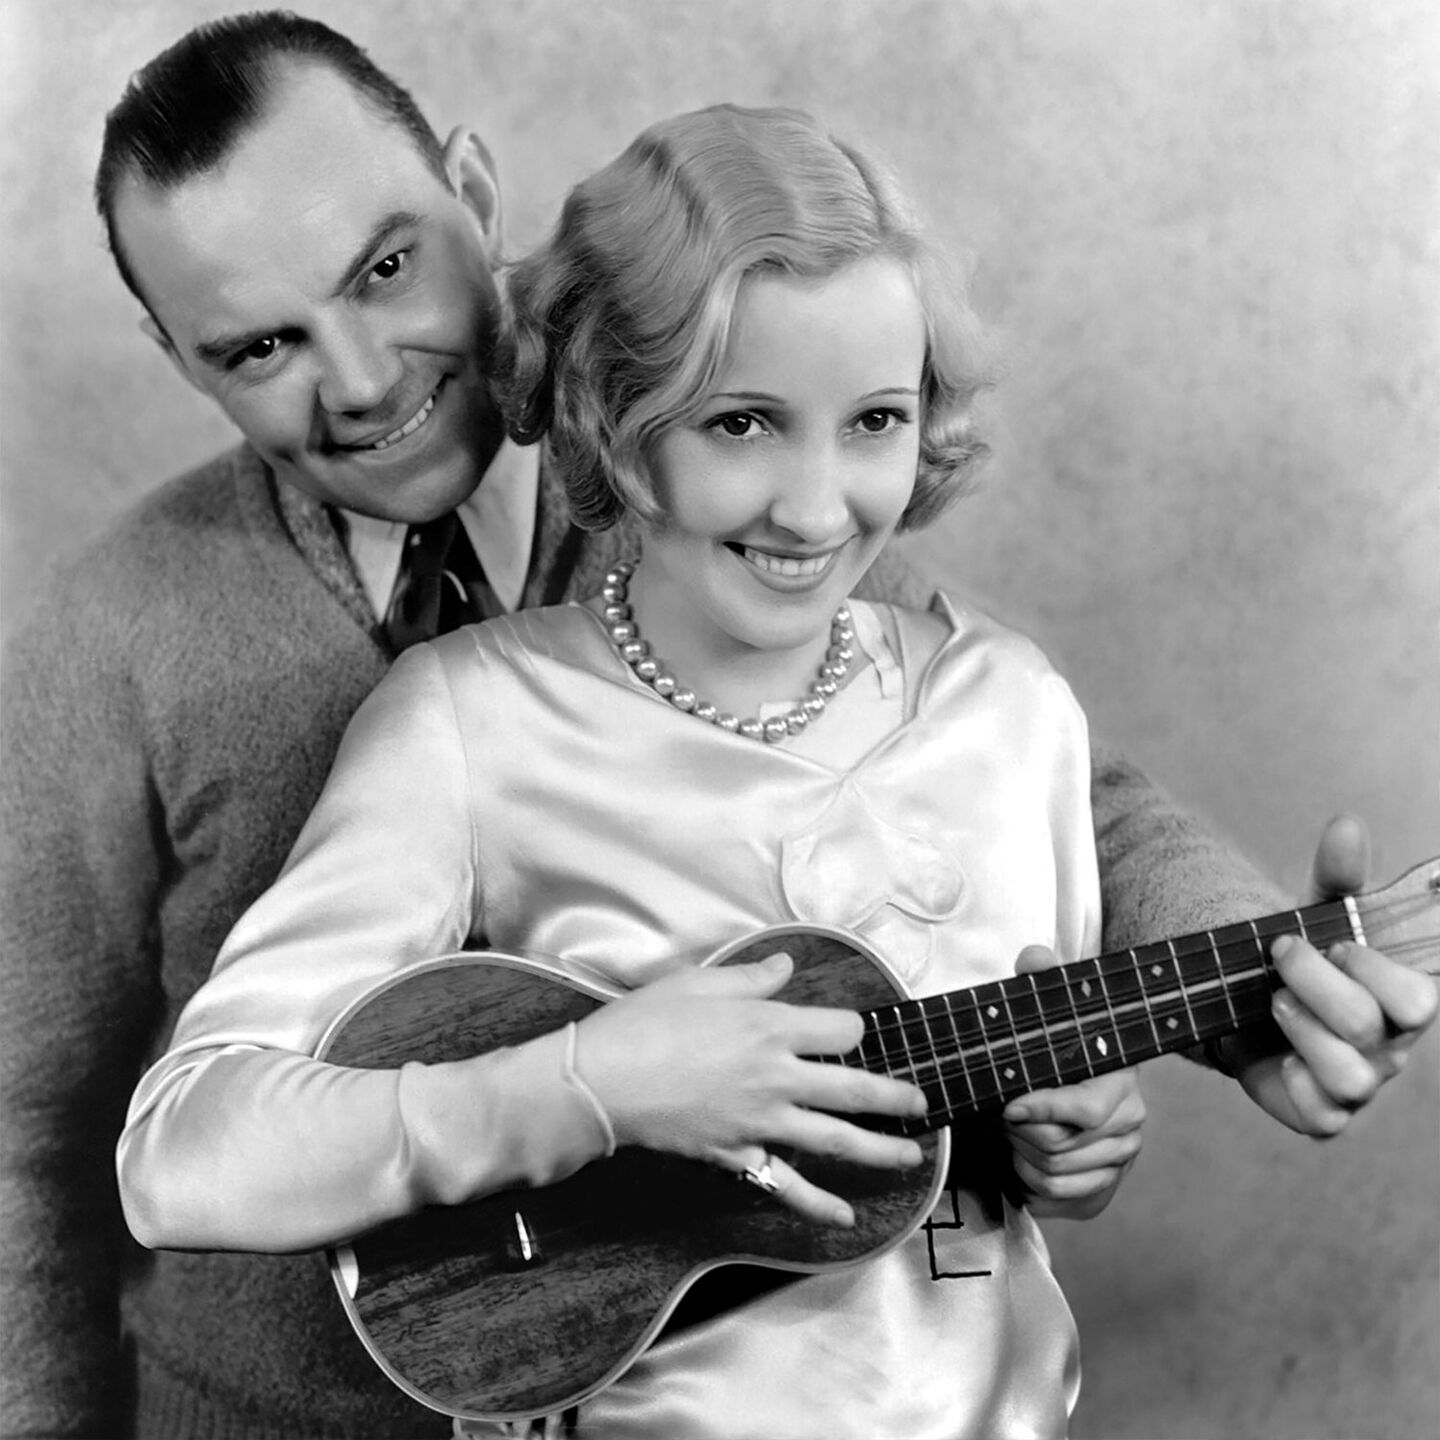 Black and white photo of a man standing behind a woman playing a ukulele